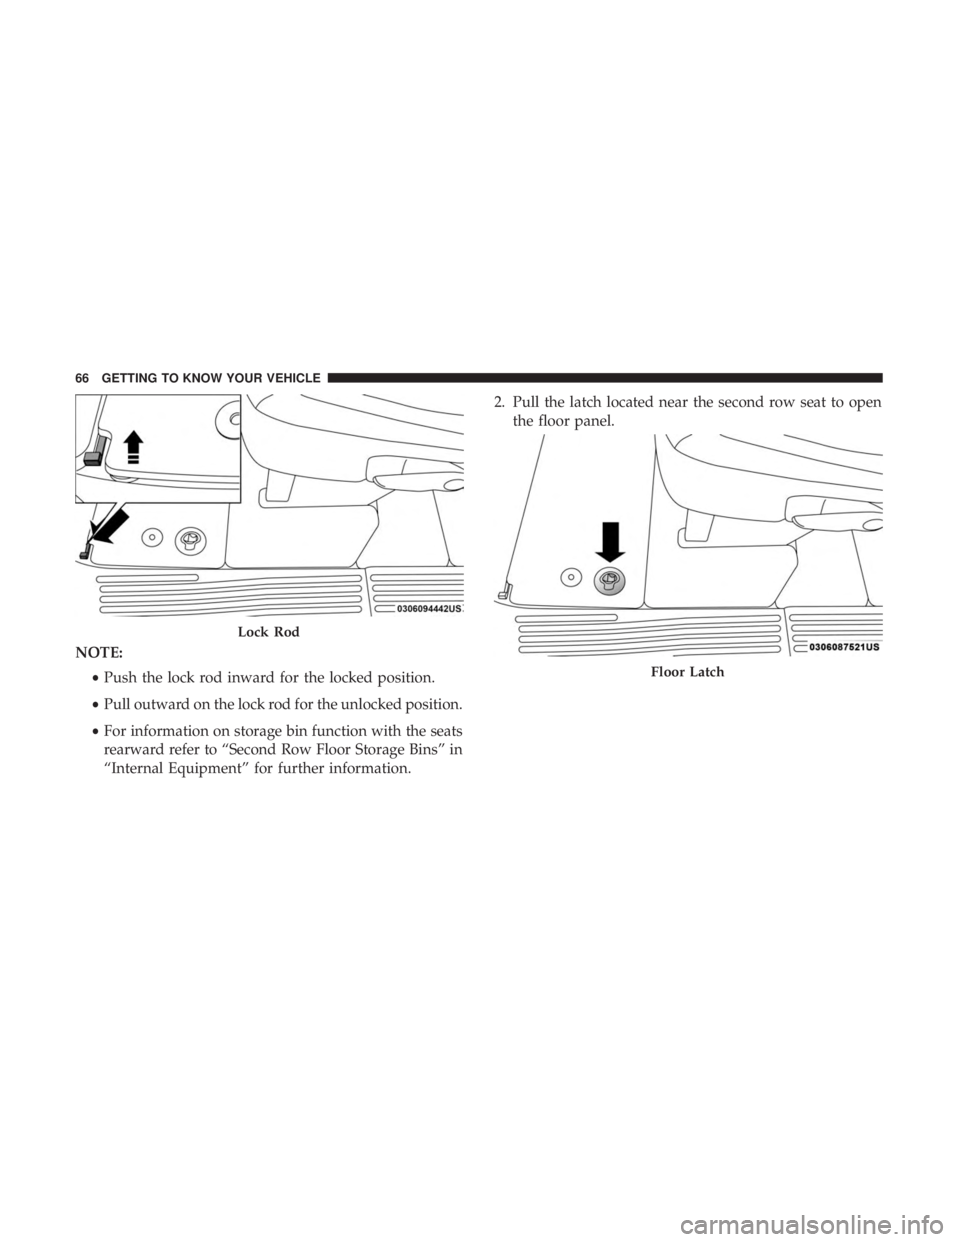 CHRYSLER PACIFICA 2019  Owners Manual NOTE:•Push the lock rod inward for the locked position.
• Pull outward on the lock rod for the unlocked position.
• For information on storage bin function with the seats
rearward refer to “Se